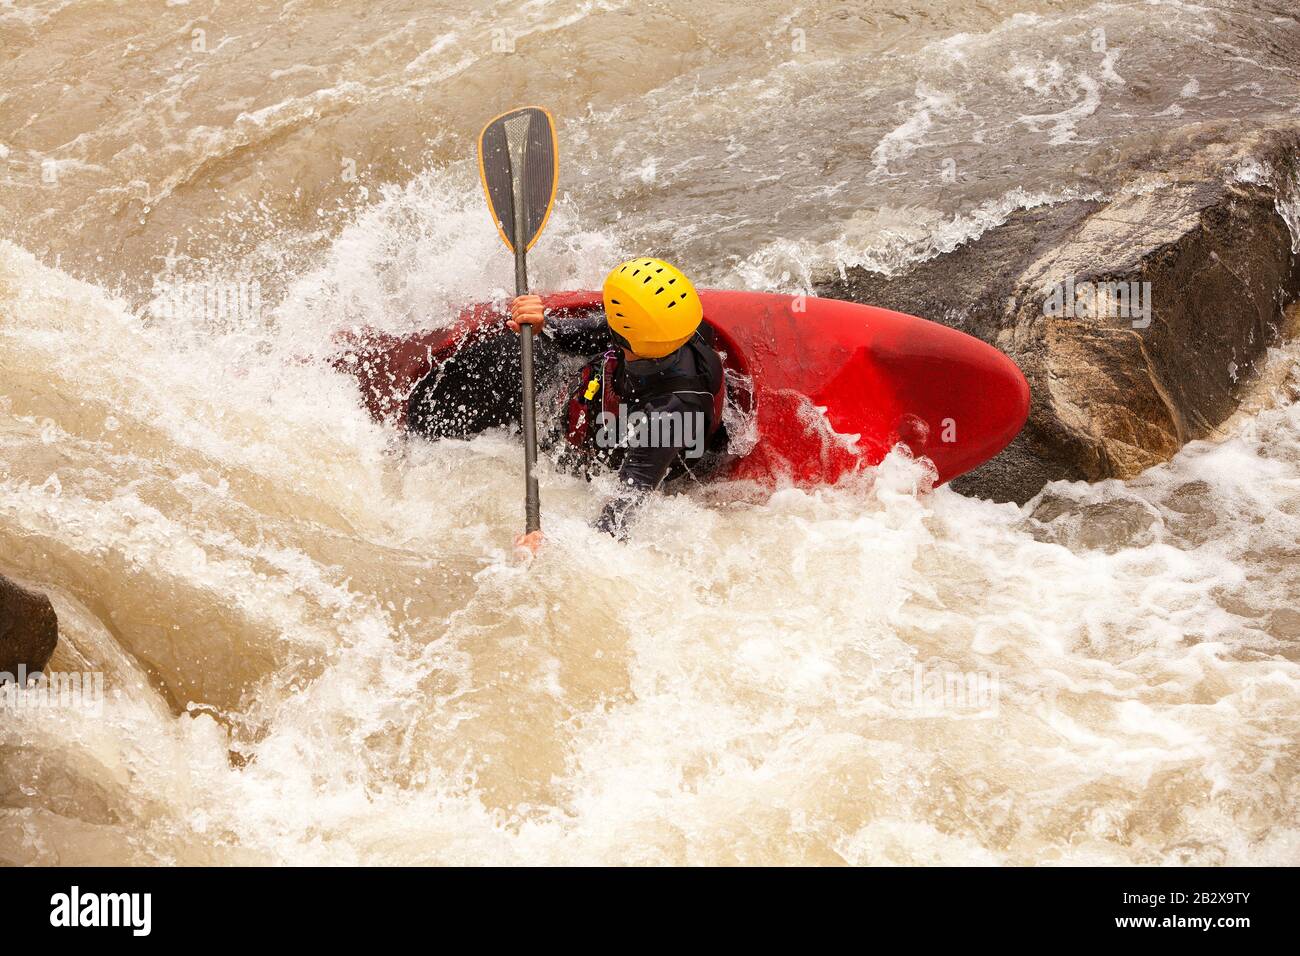 An Active Kayaker On The Rough Water Stock Photo